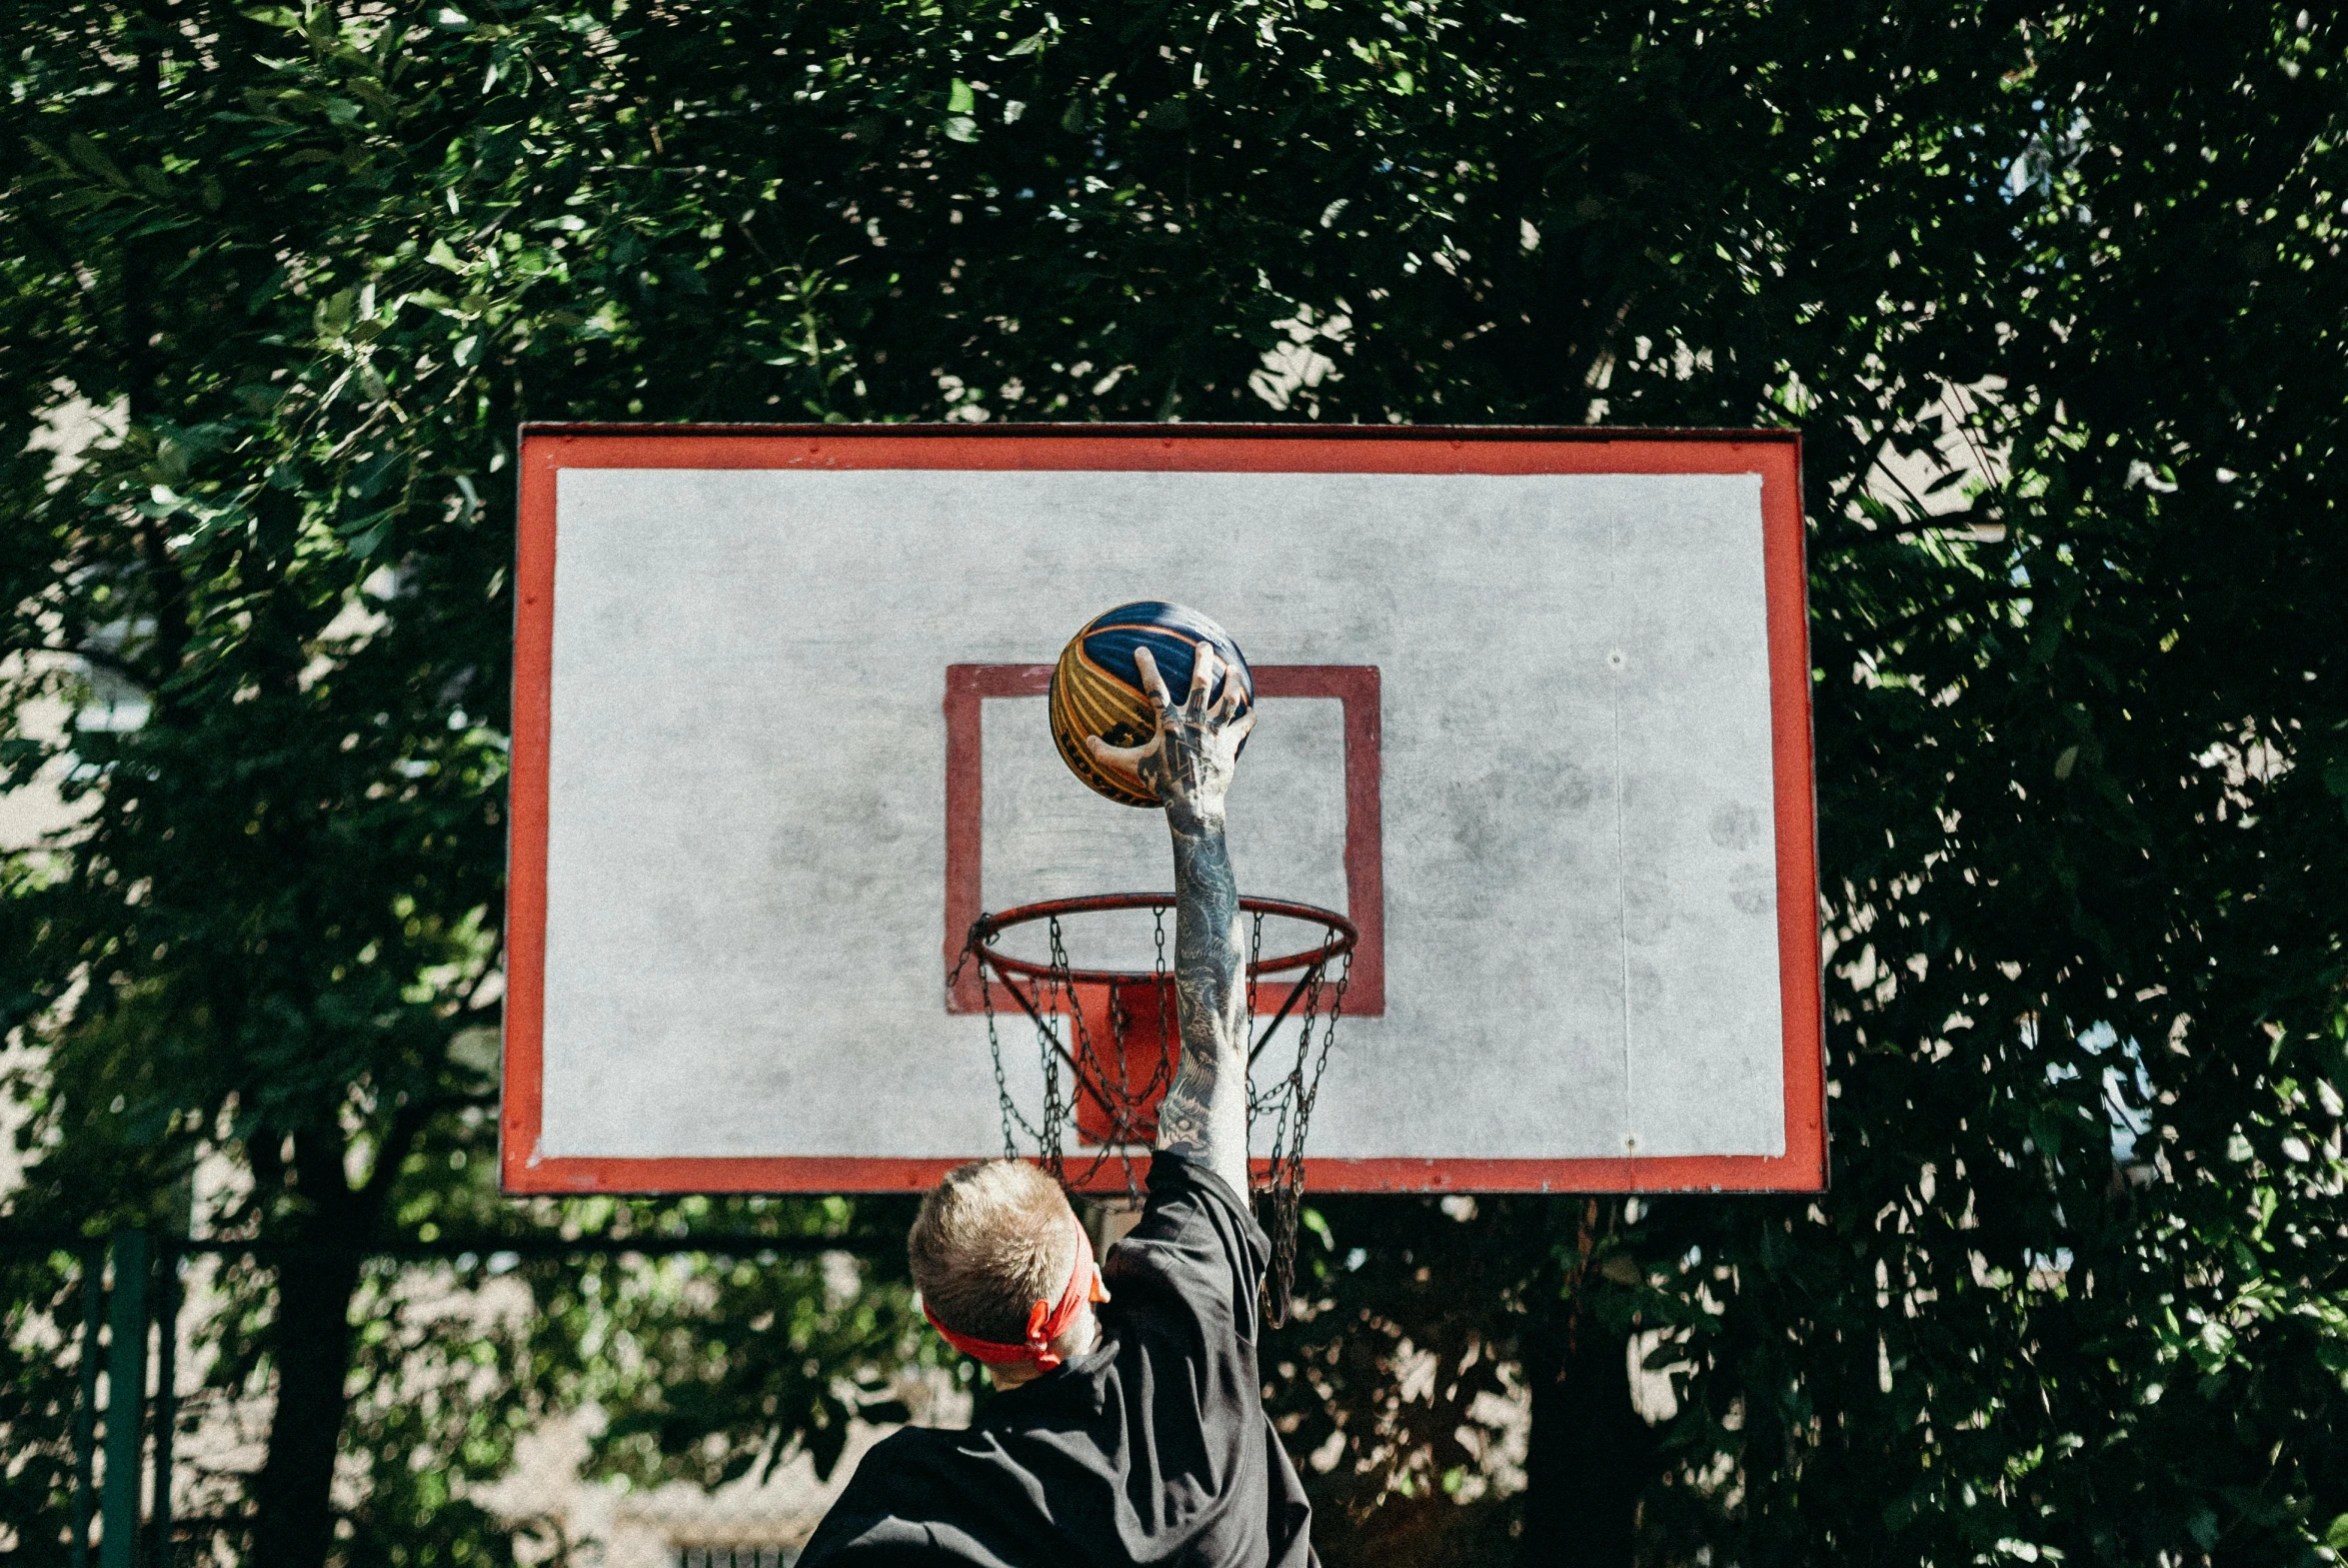 a man standing on top of a basketball court holding a basketball, by Joe Bowler, pexels contest winner, dunking, 15081959 21121991 01012000 4k, zoomed in, backyard